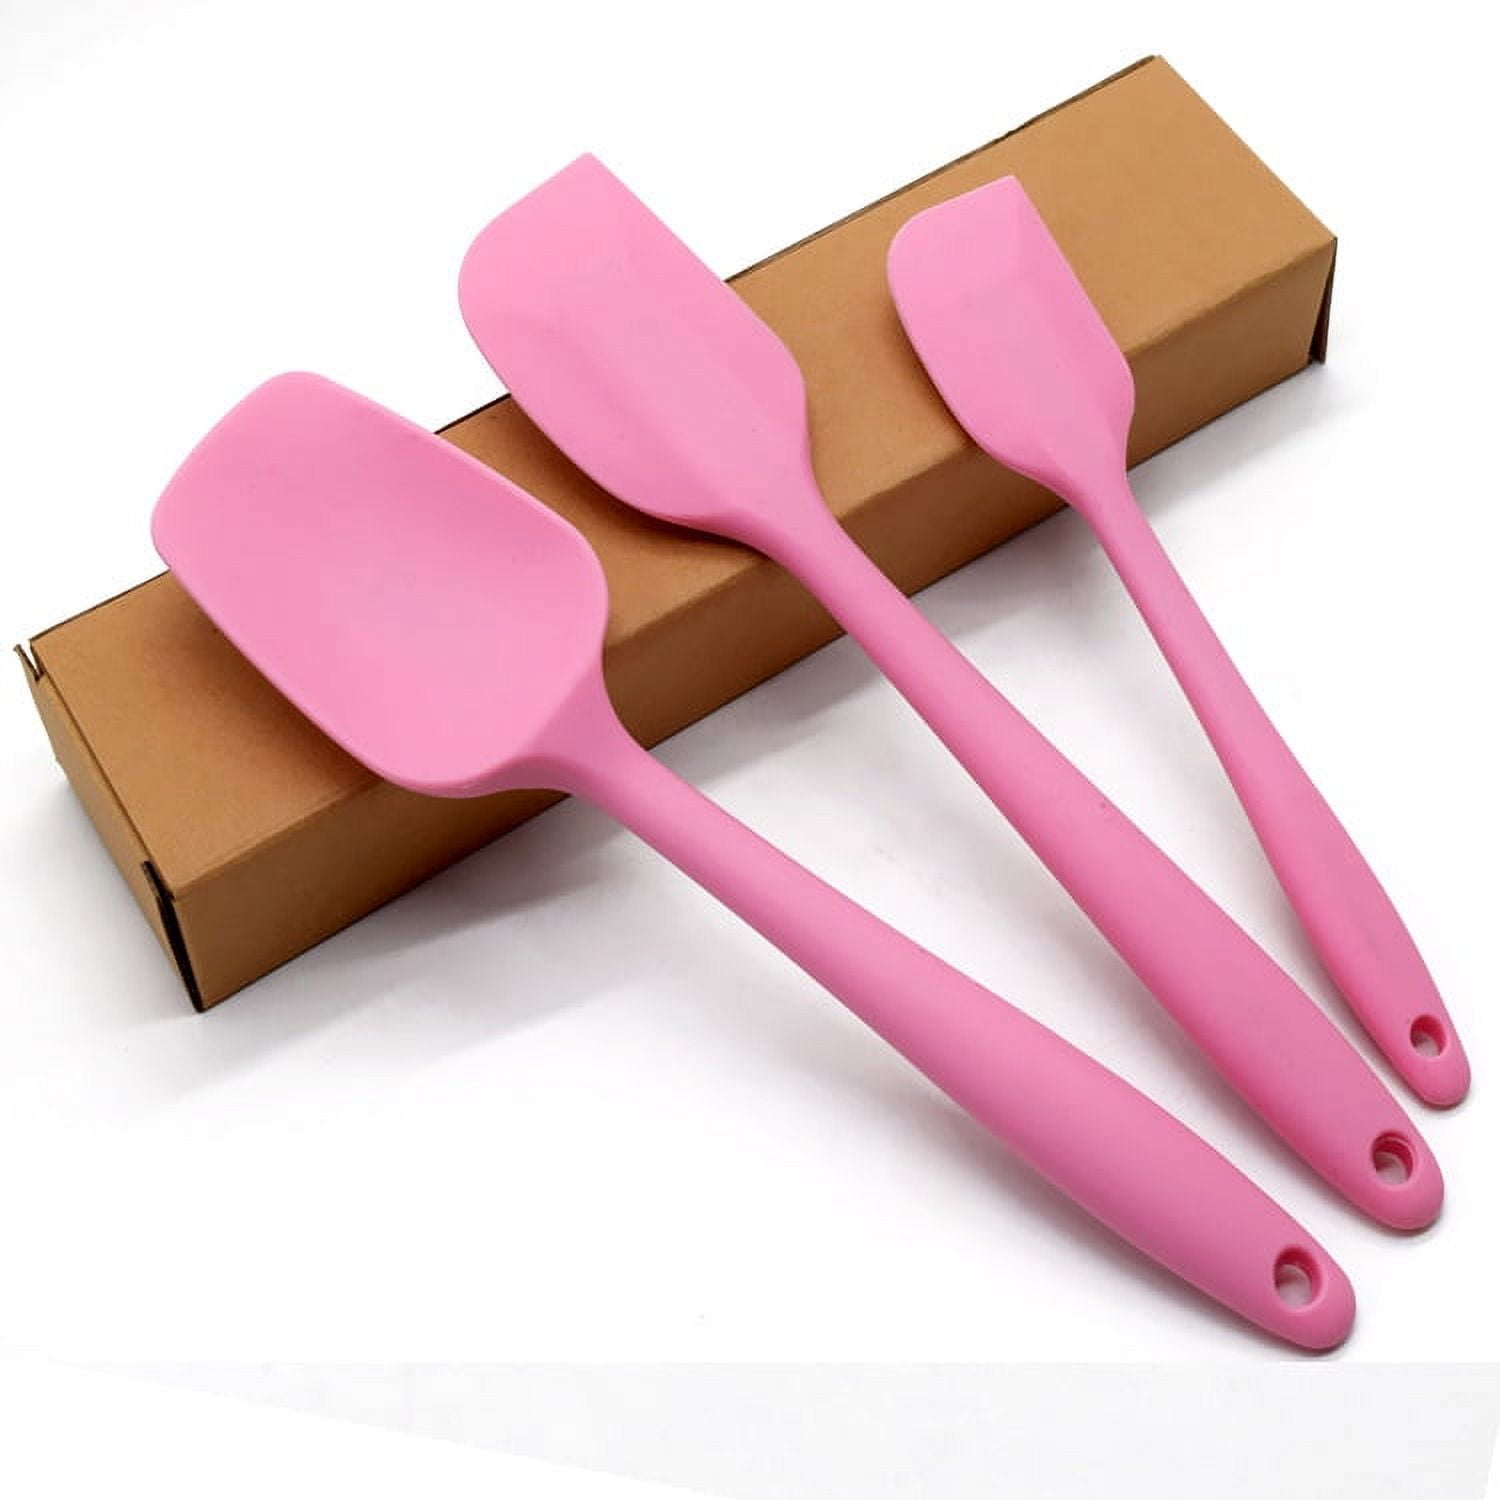 Restaurantware 10.6 inch x 2.2 inch Silicone Spatula, 1 Flat Flexible Spatula - Dishwasher-Safe, withstands Heat Up to 570F, Purple Silicone Mixing